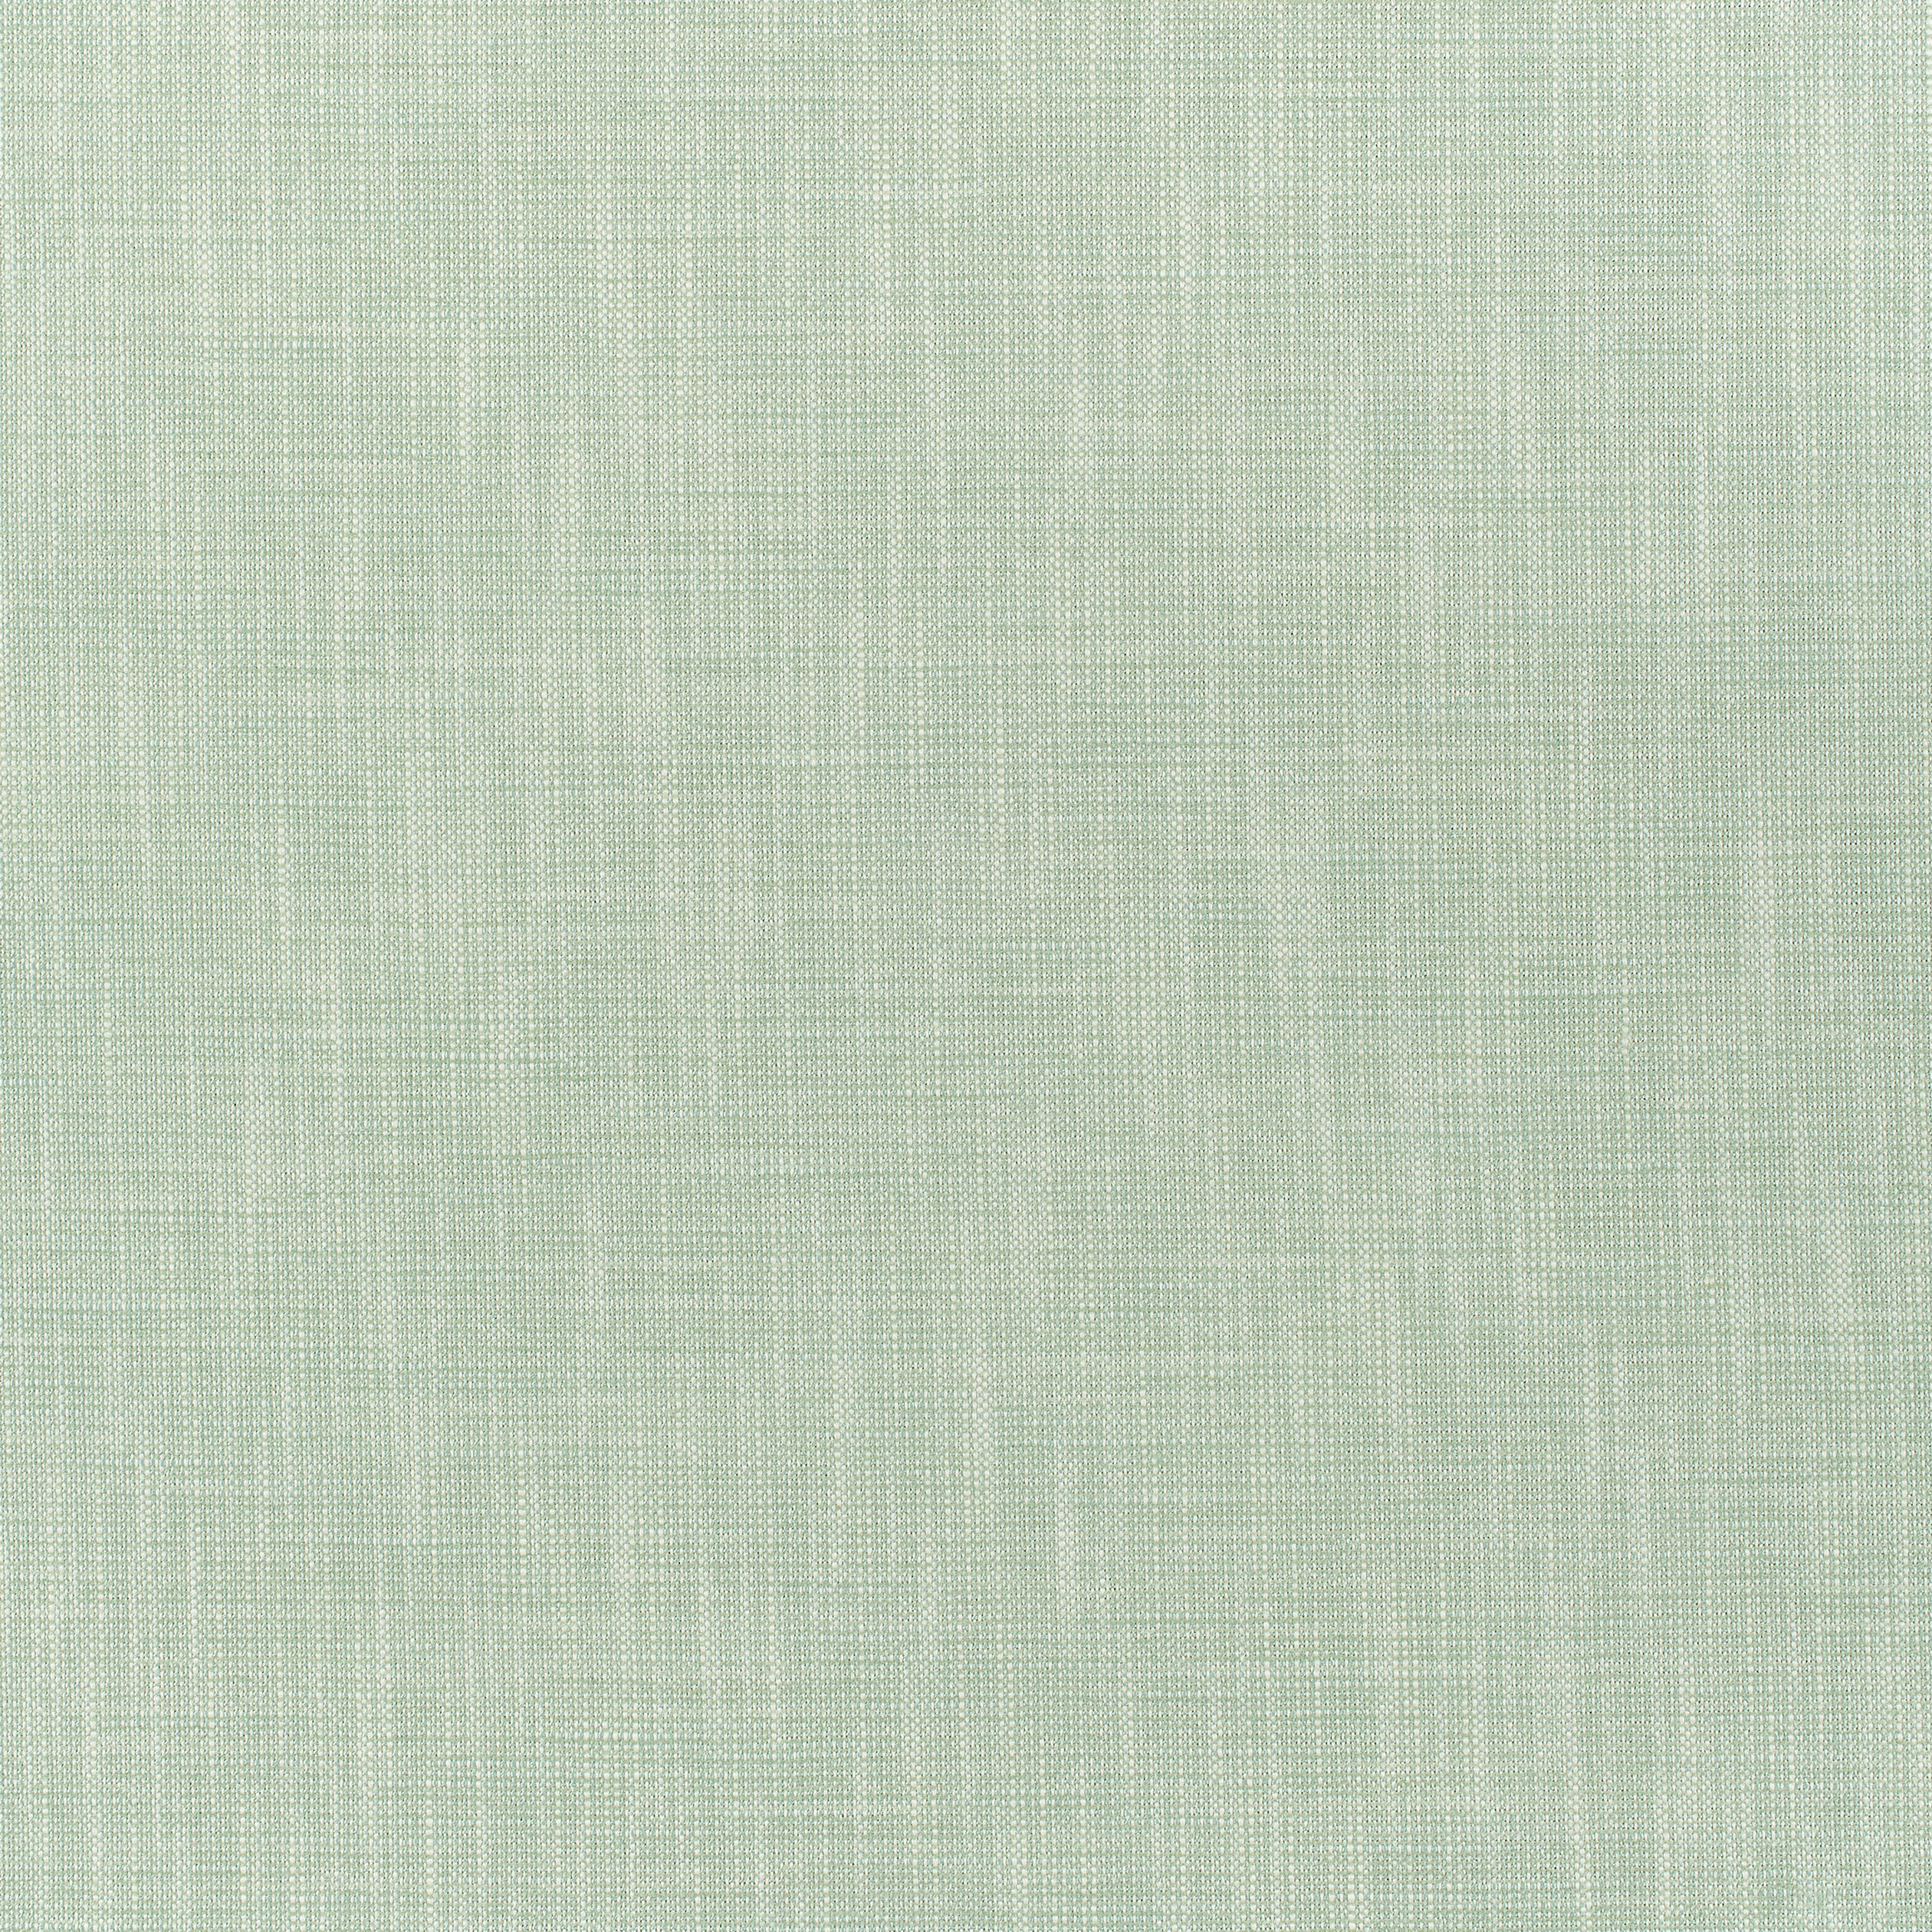 Bailey fabric in seafoam color - pattern number W80493 - by Thibaut in the Mosaic collection